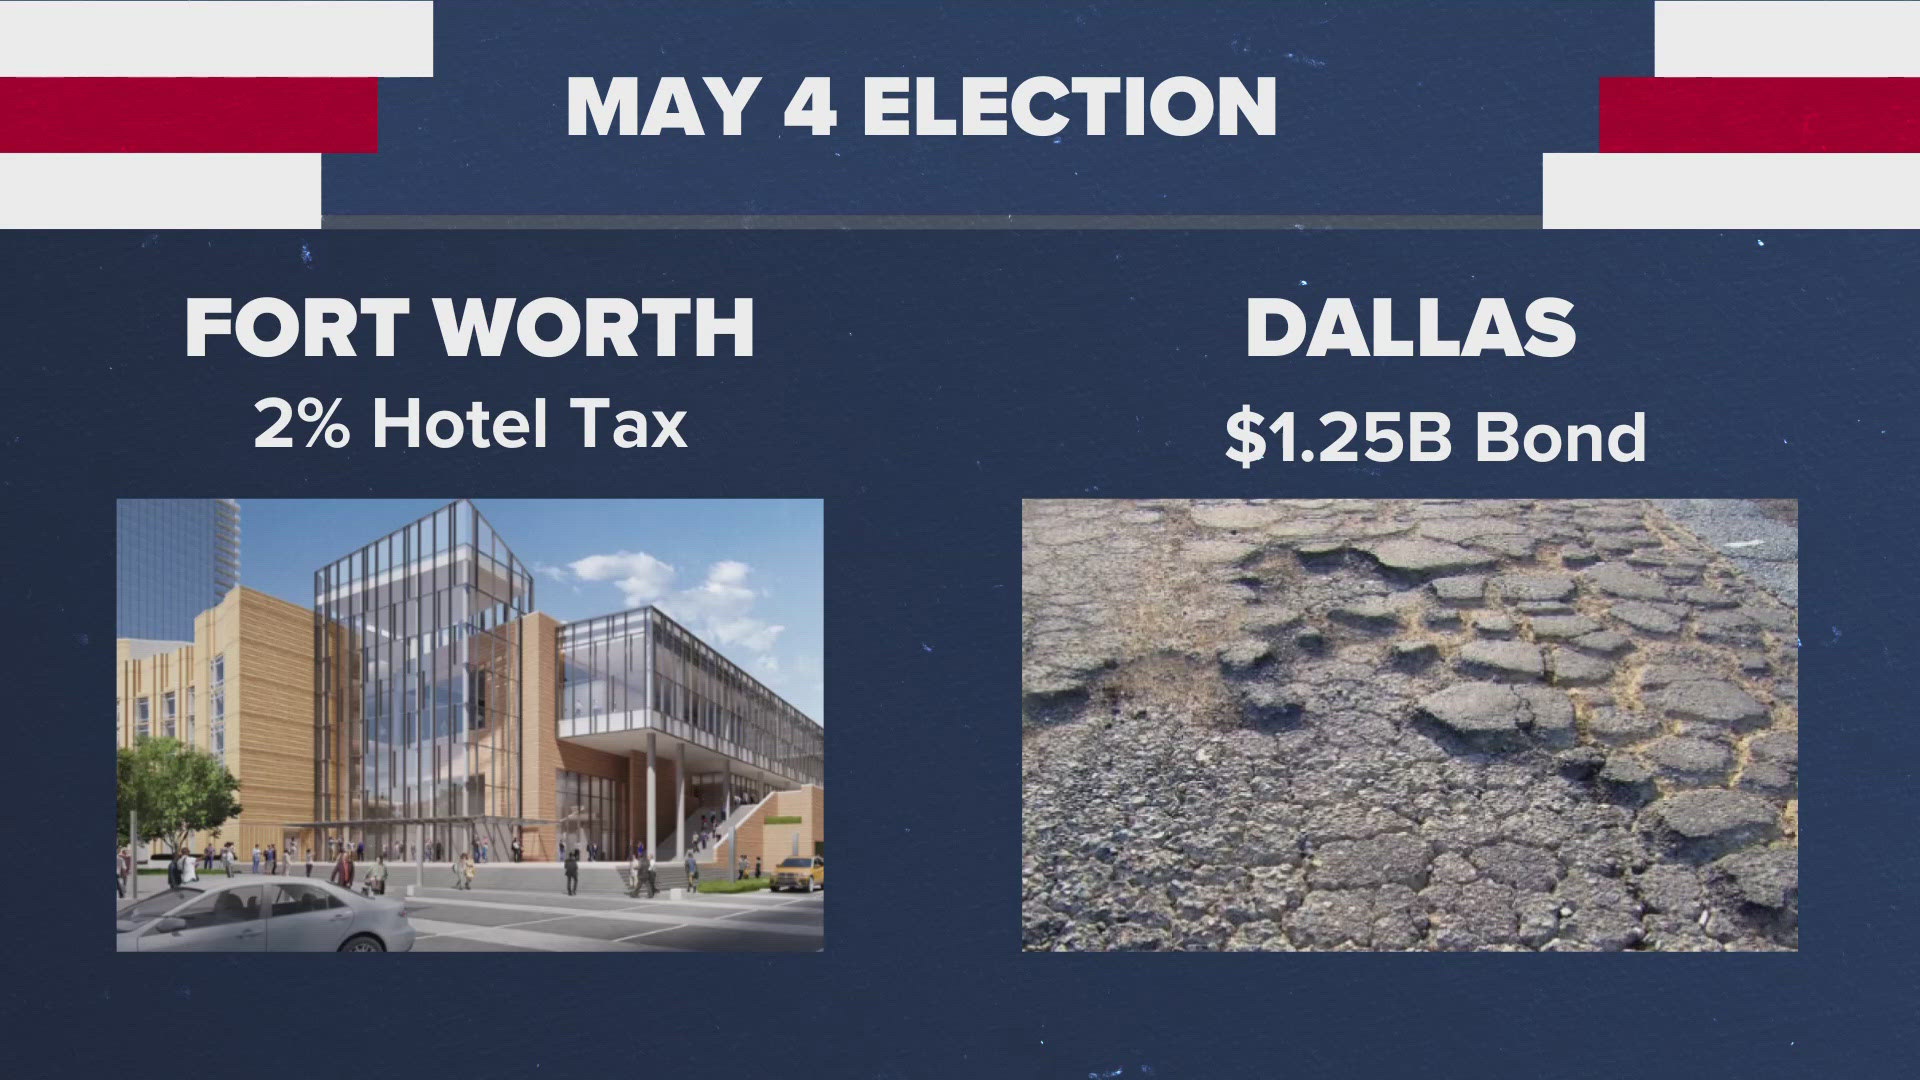 Bond propositions for various Dallas-Fort Worth area cities, including ten propositions for a $1.25 billion bond package that voters in Dallas will consider.